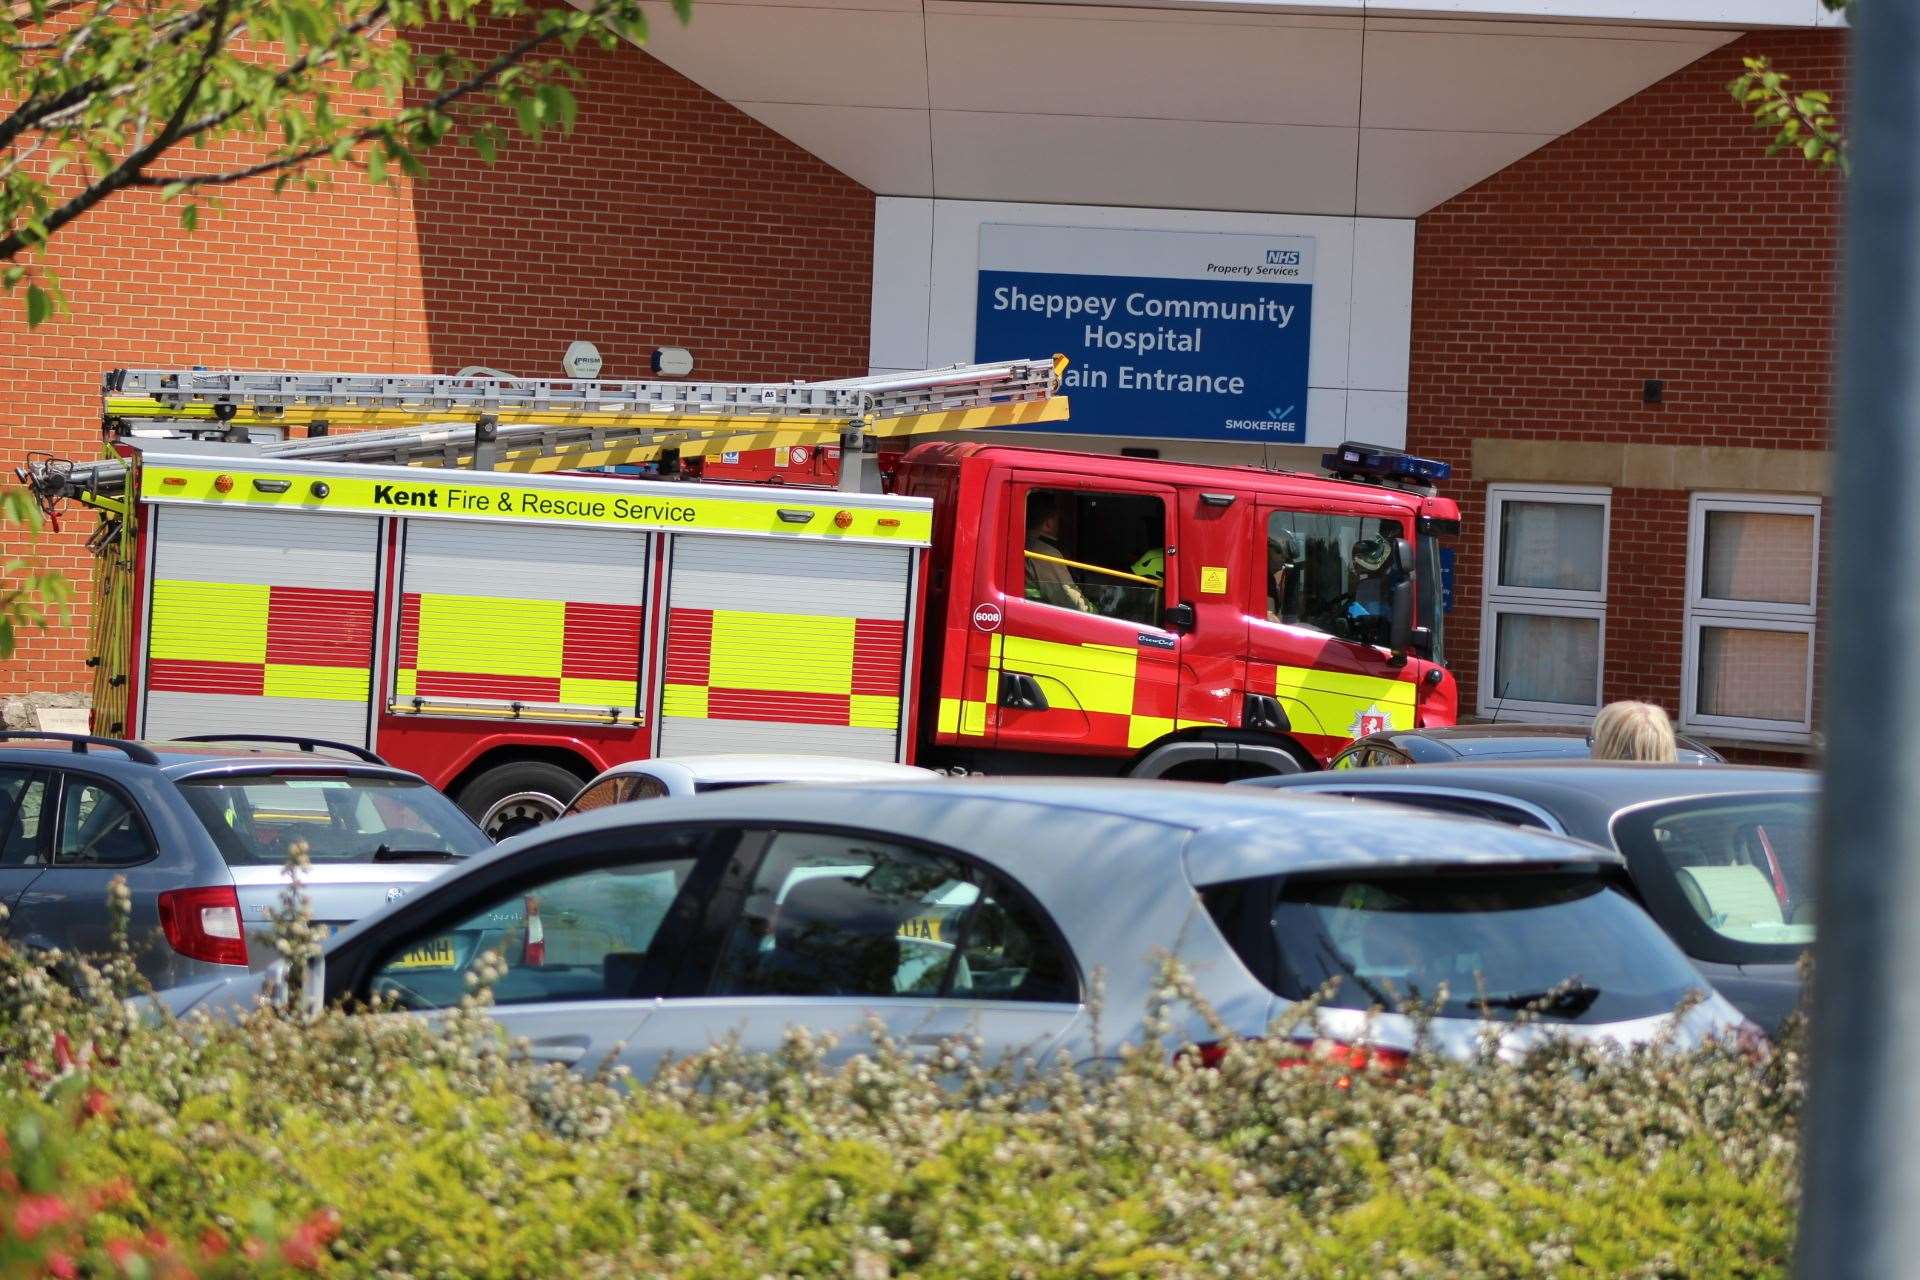 Fire engine outside the entrance of Sheppey Community Hospital